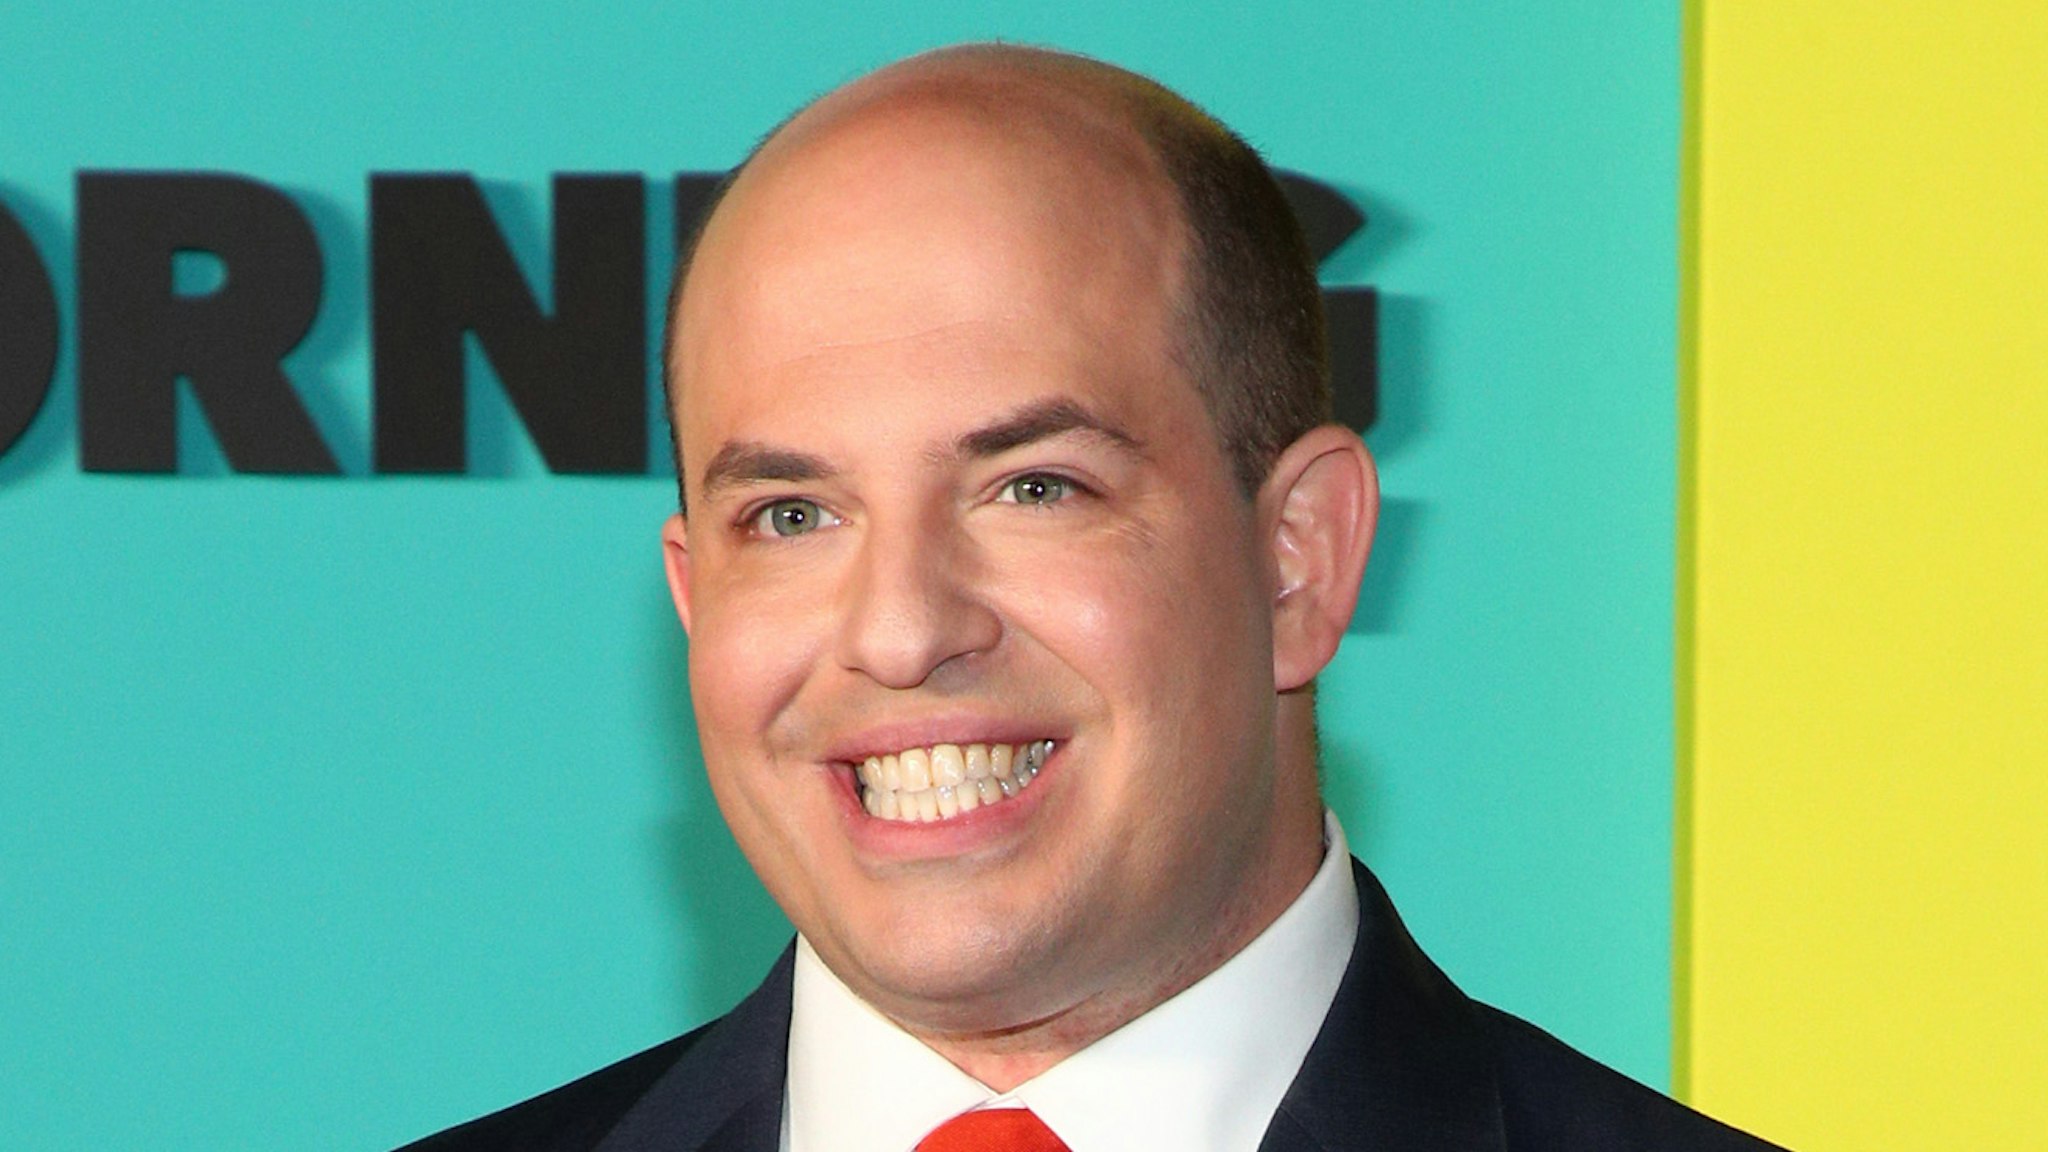 NEW YORK, NEW YORK - OCTOBER 28: Brian Stelter attends the Apple TV+'s "The Morning Show" World Premiere at David Geffen Hall on October 28, 2019 in New York City.